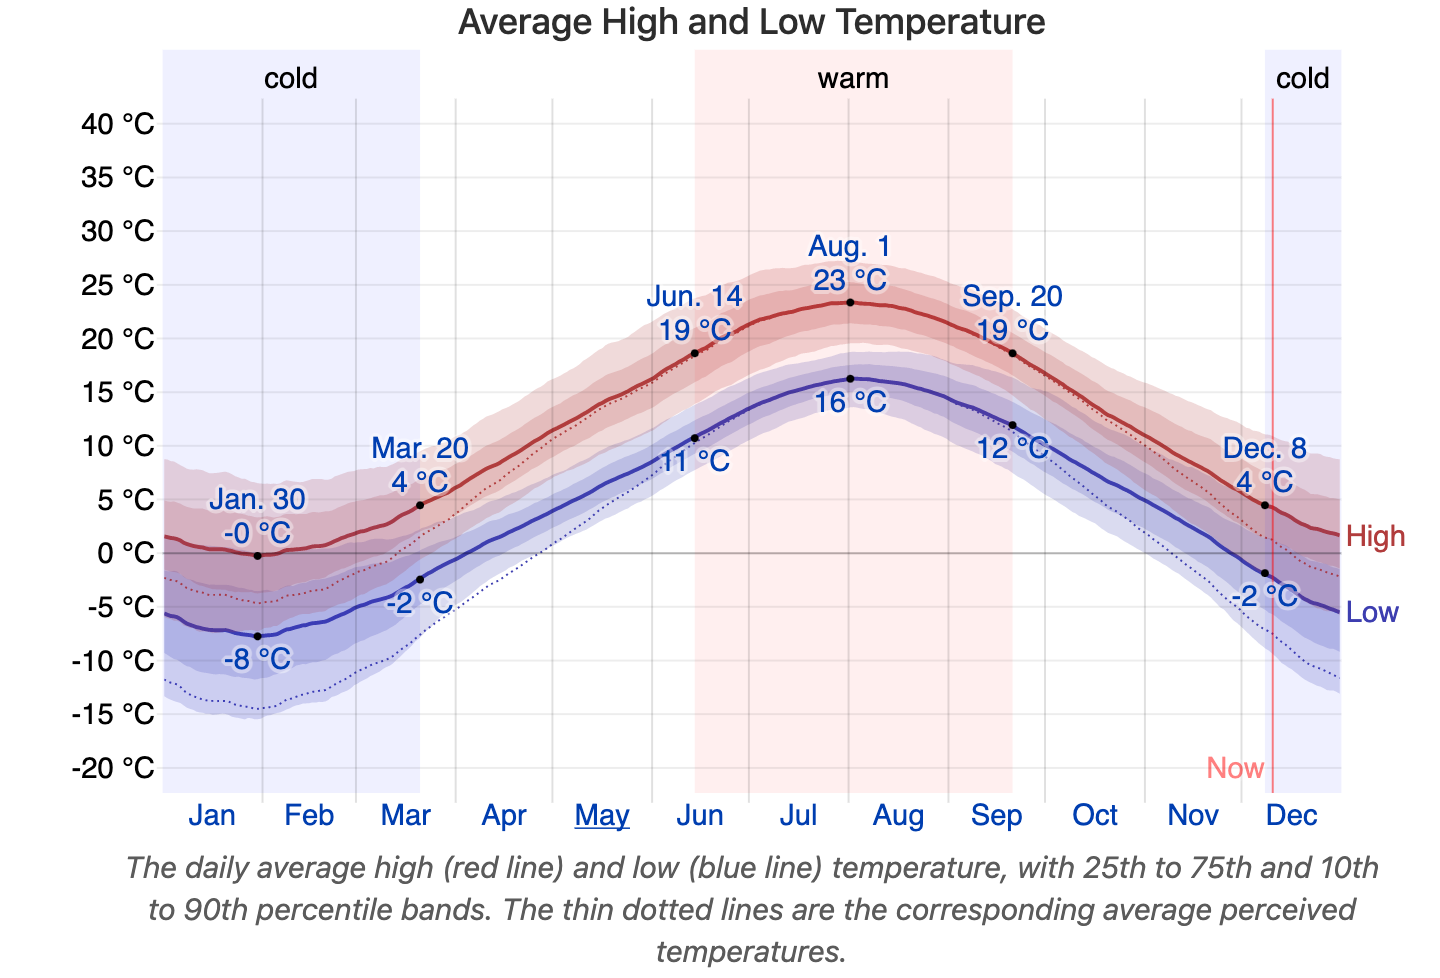 Climatological mean daily high and low temperatures in Halifax NS from weatherspark.com